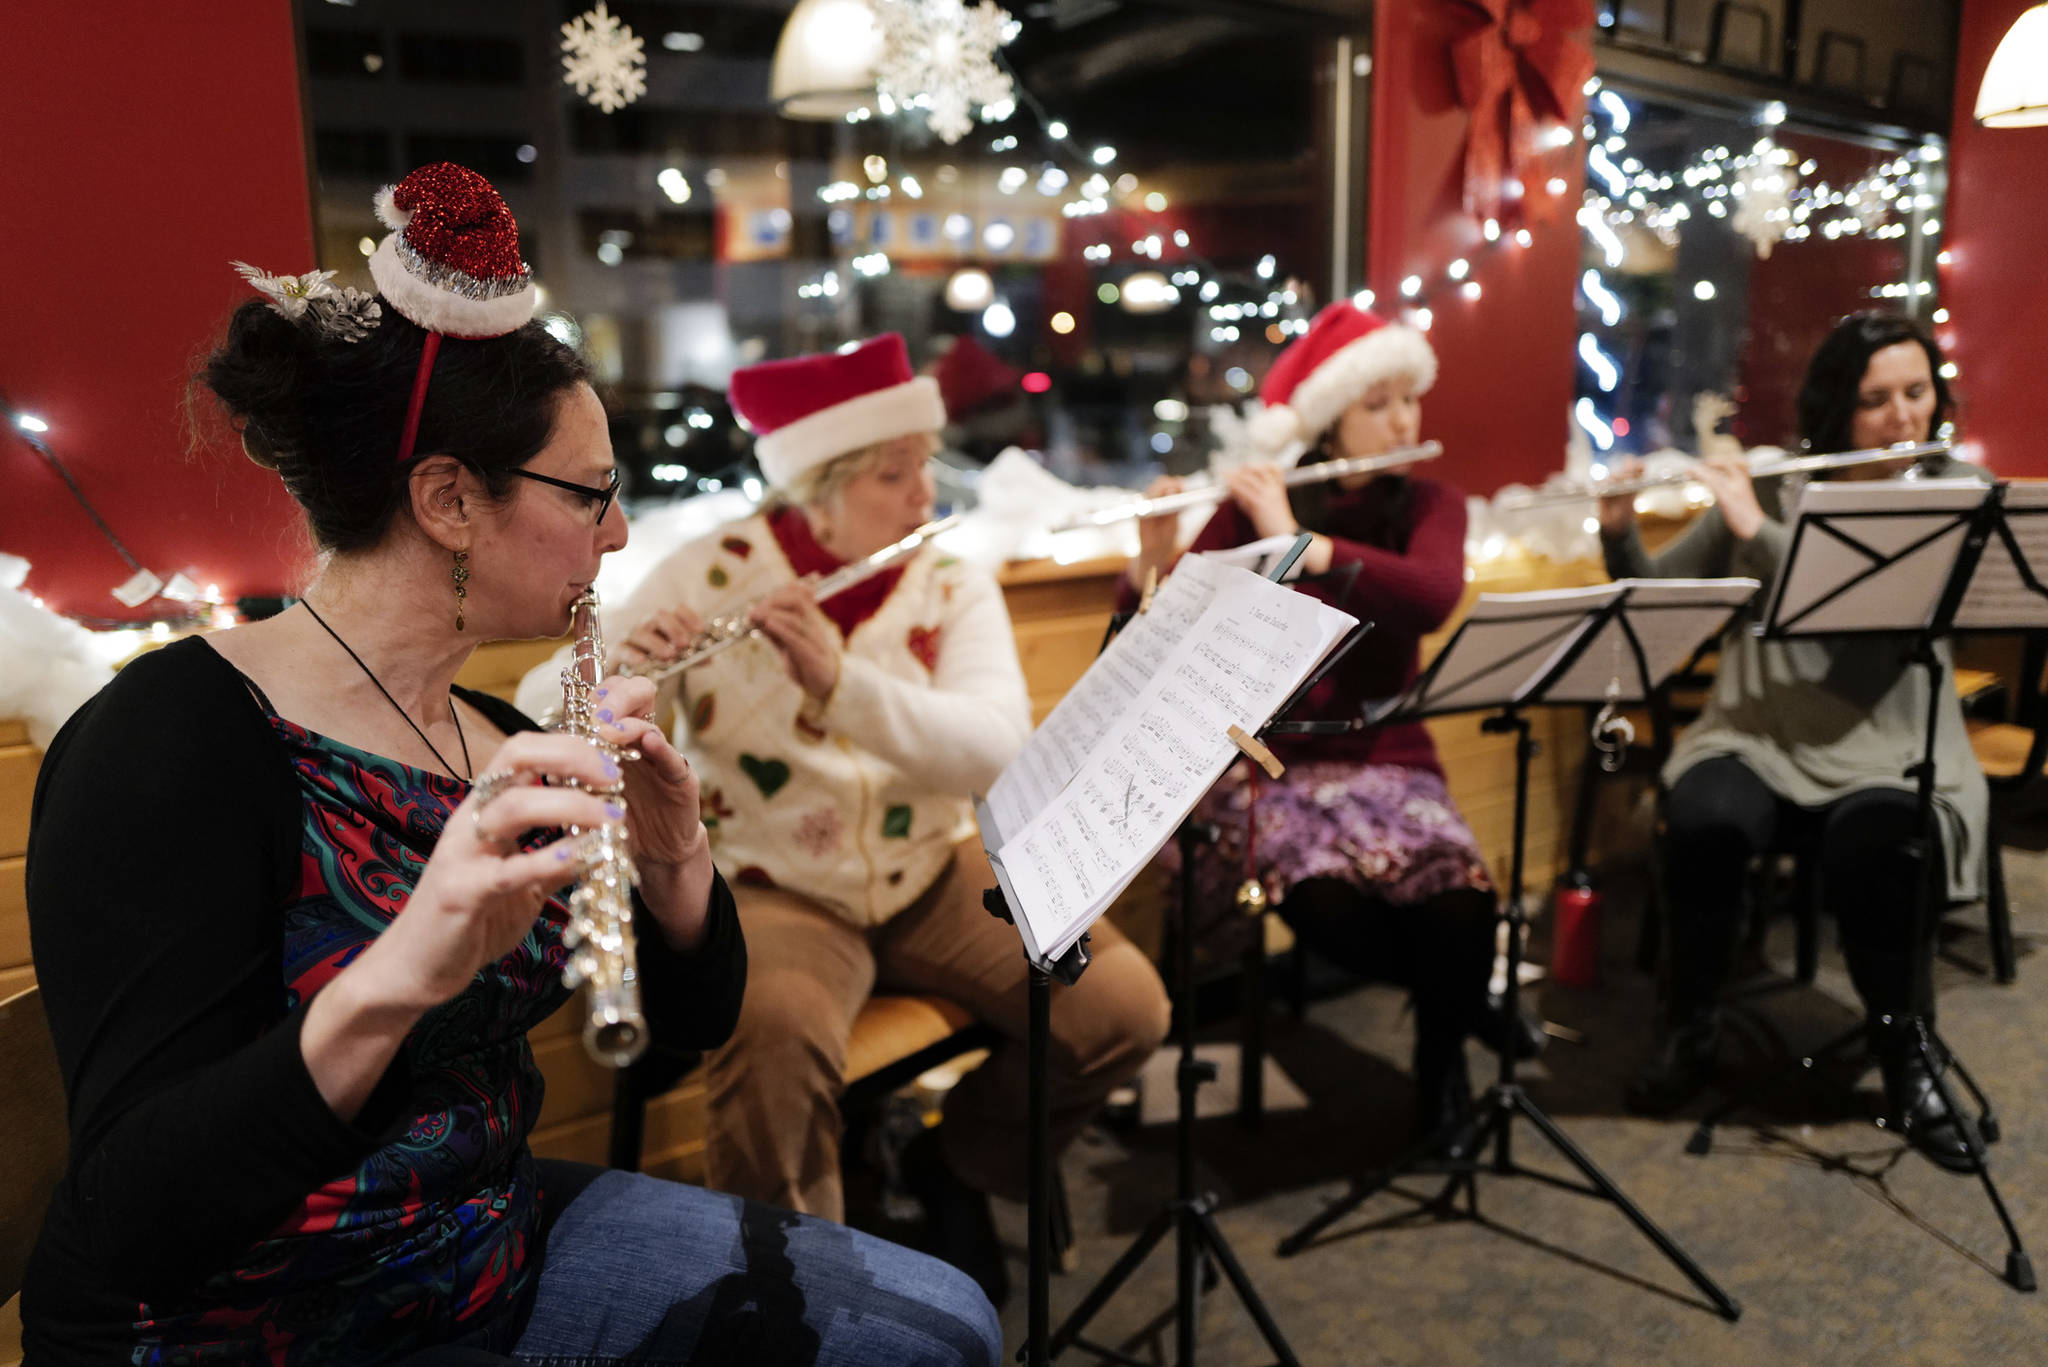 Members of Flutatious perform at Heritage Coffee during Gallery Walk on Friday, Dec. 6, 2019. (Michael Penn | Juneau Empire)